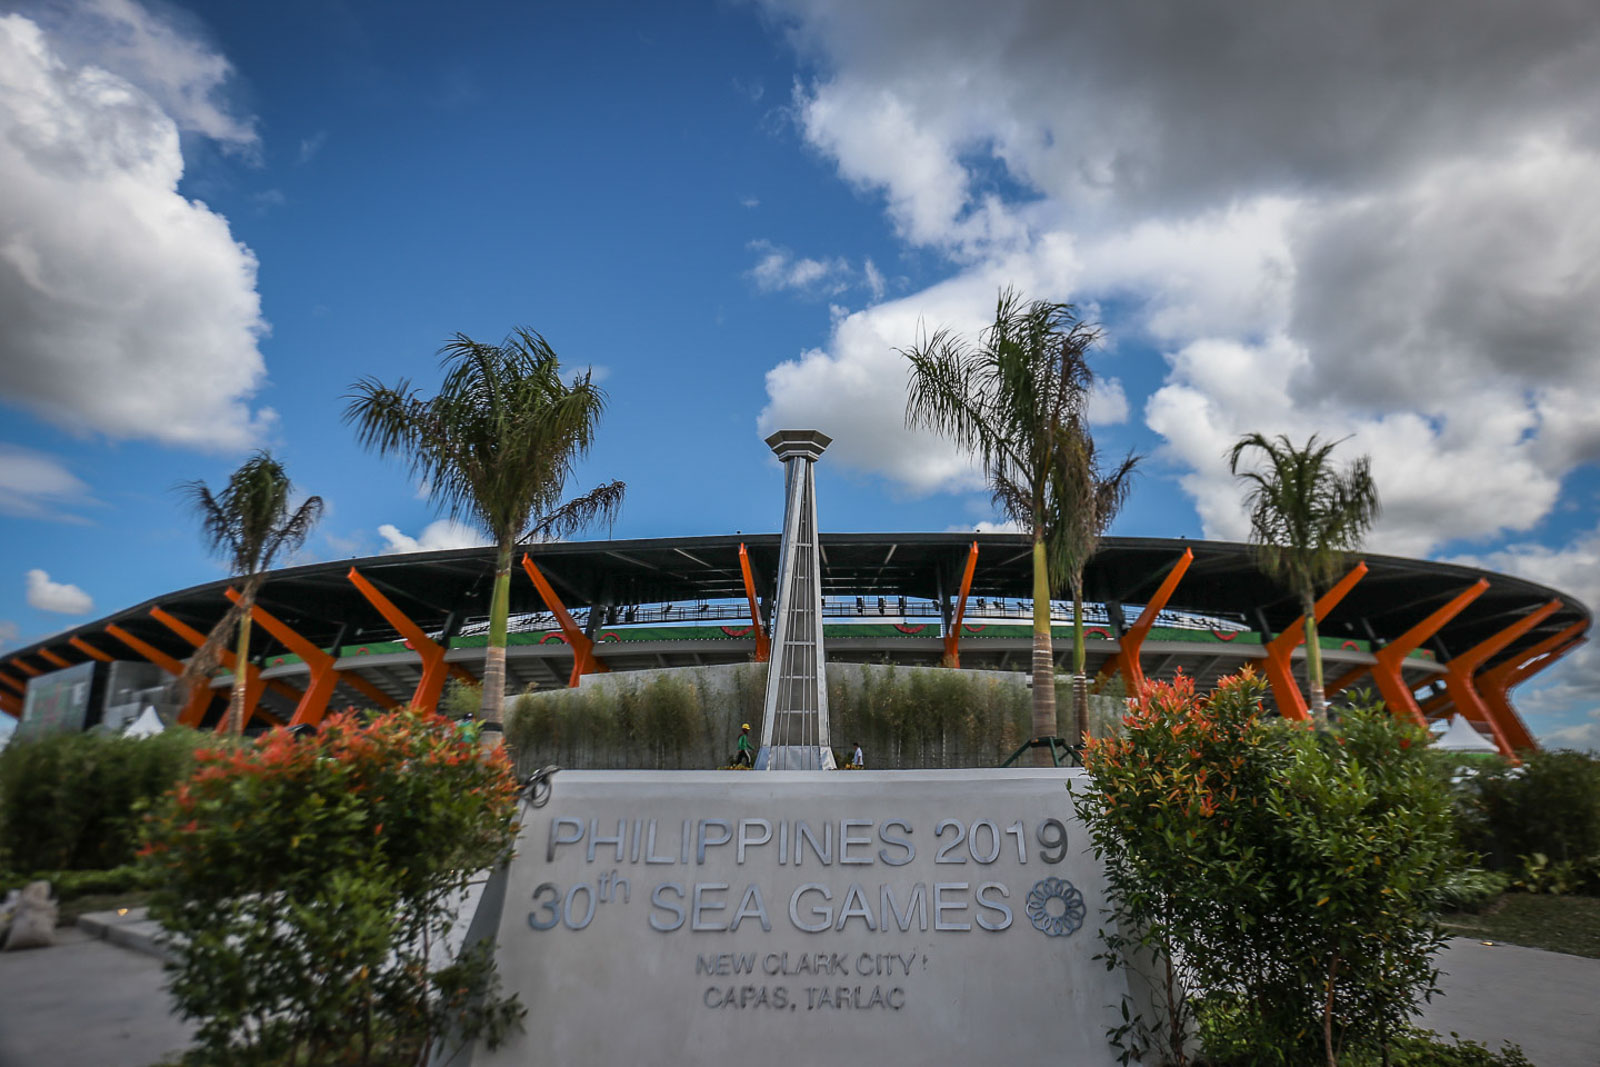 THE CAULDRON. The controversial SEA Games 2019 cauldron stands in front of the Athletics Stadium at the New Clark City in Capas, Tarlac. Photo by Josh Albelda/Rappler 